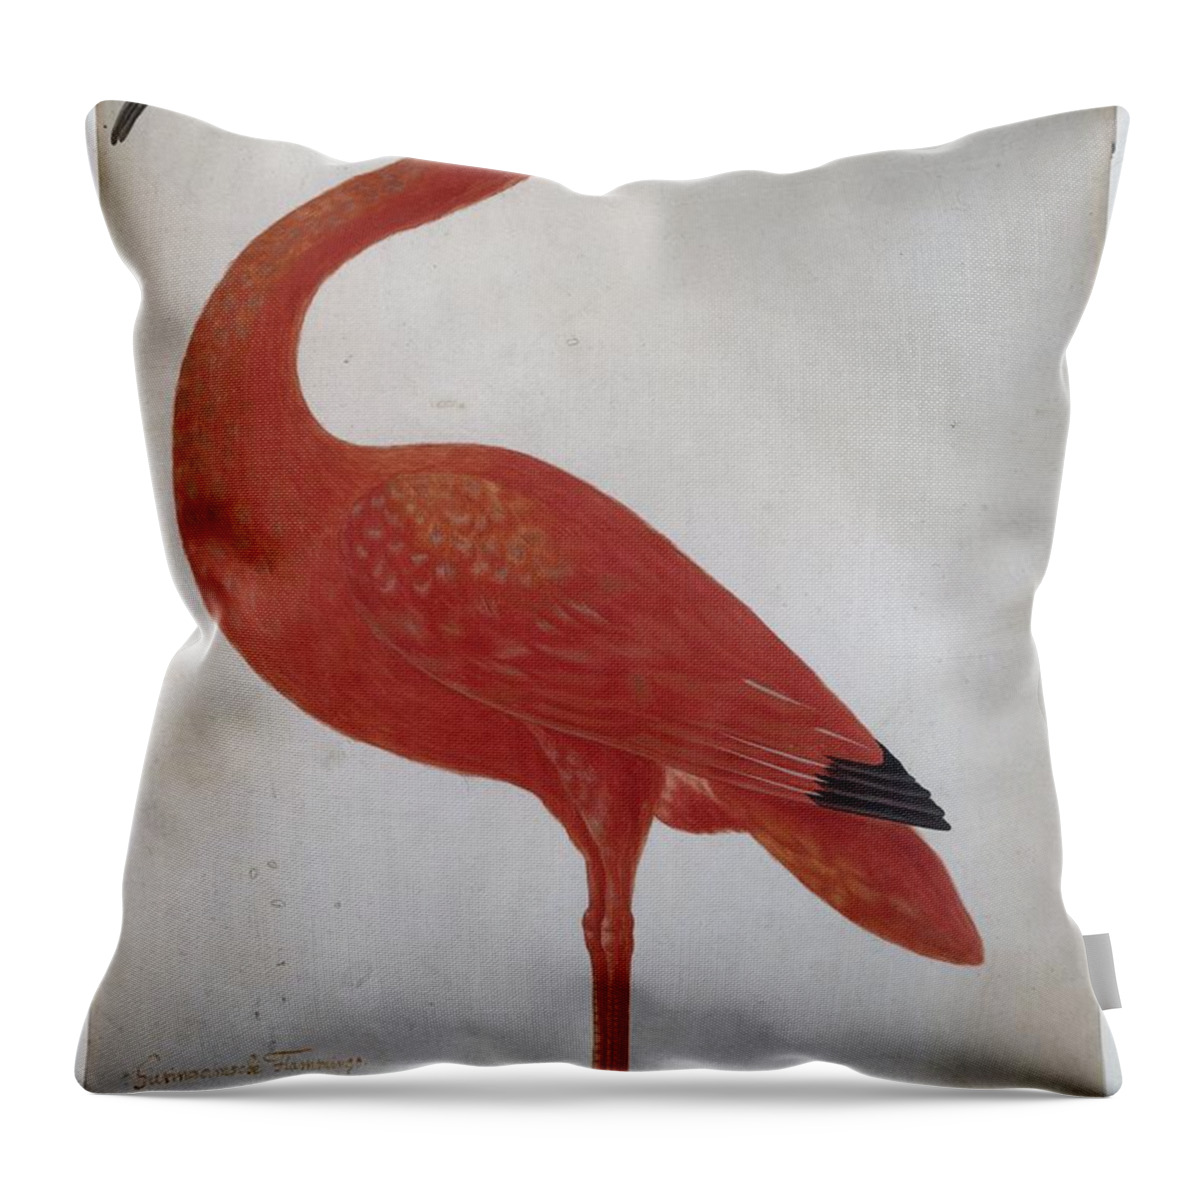 Scarlet Ibis With An Egg Throw Pillow featuring the painting Scarlet Ibis with an Egg by MotionAge Designs